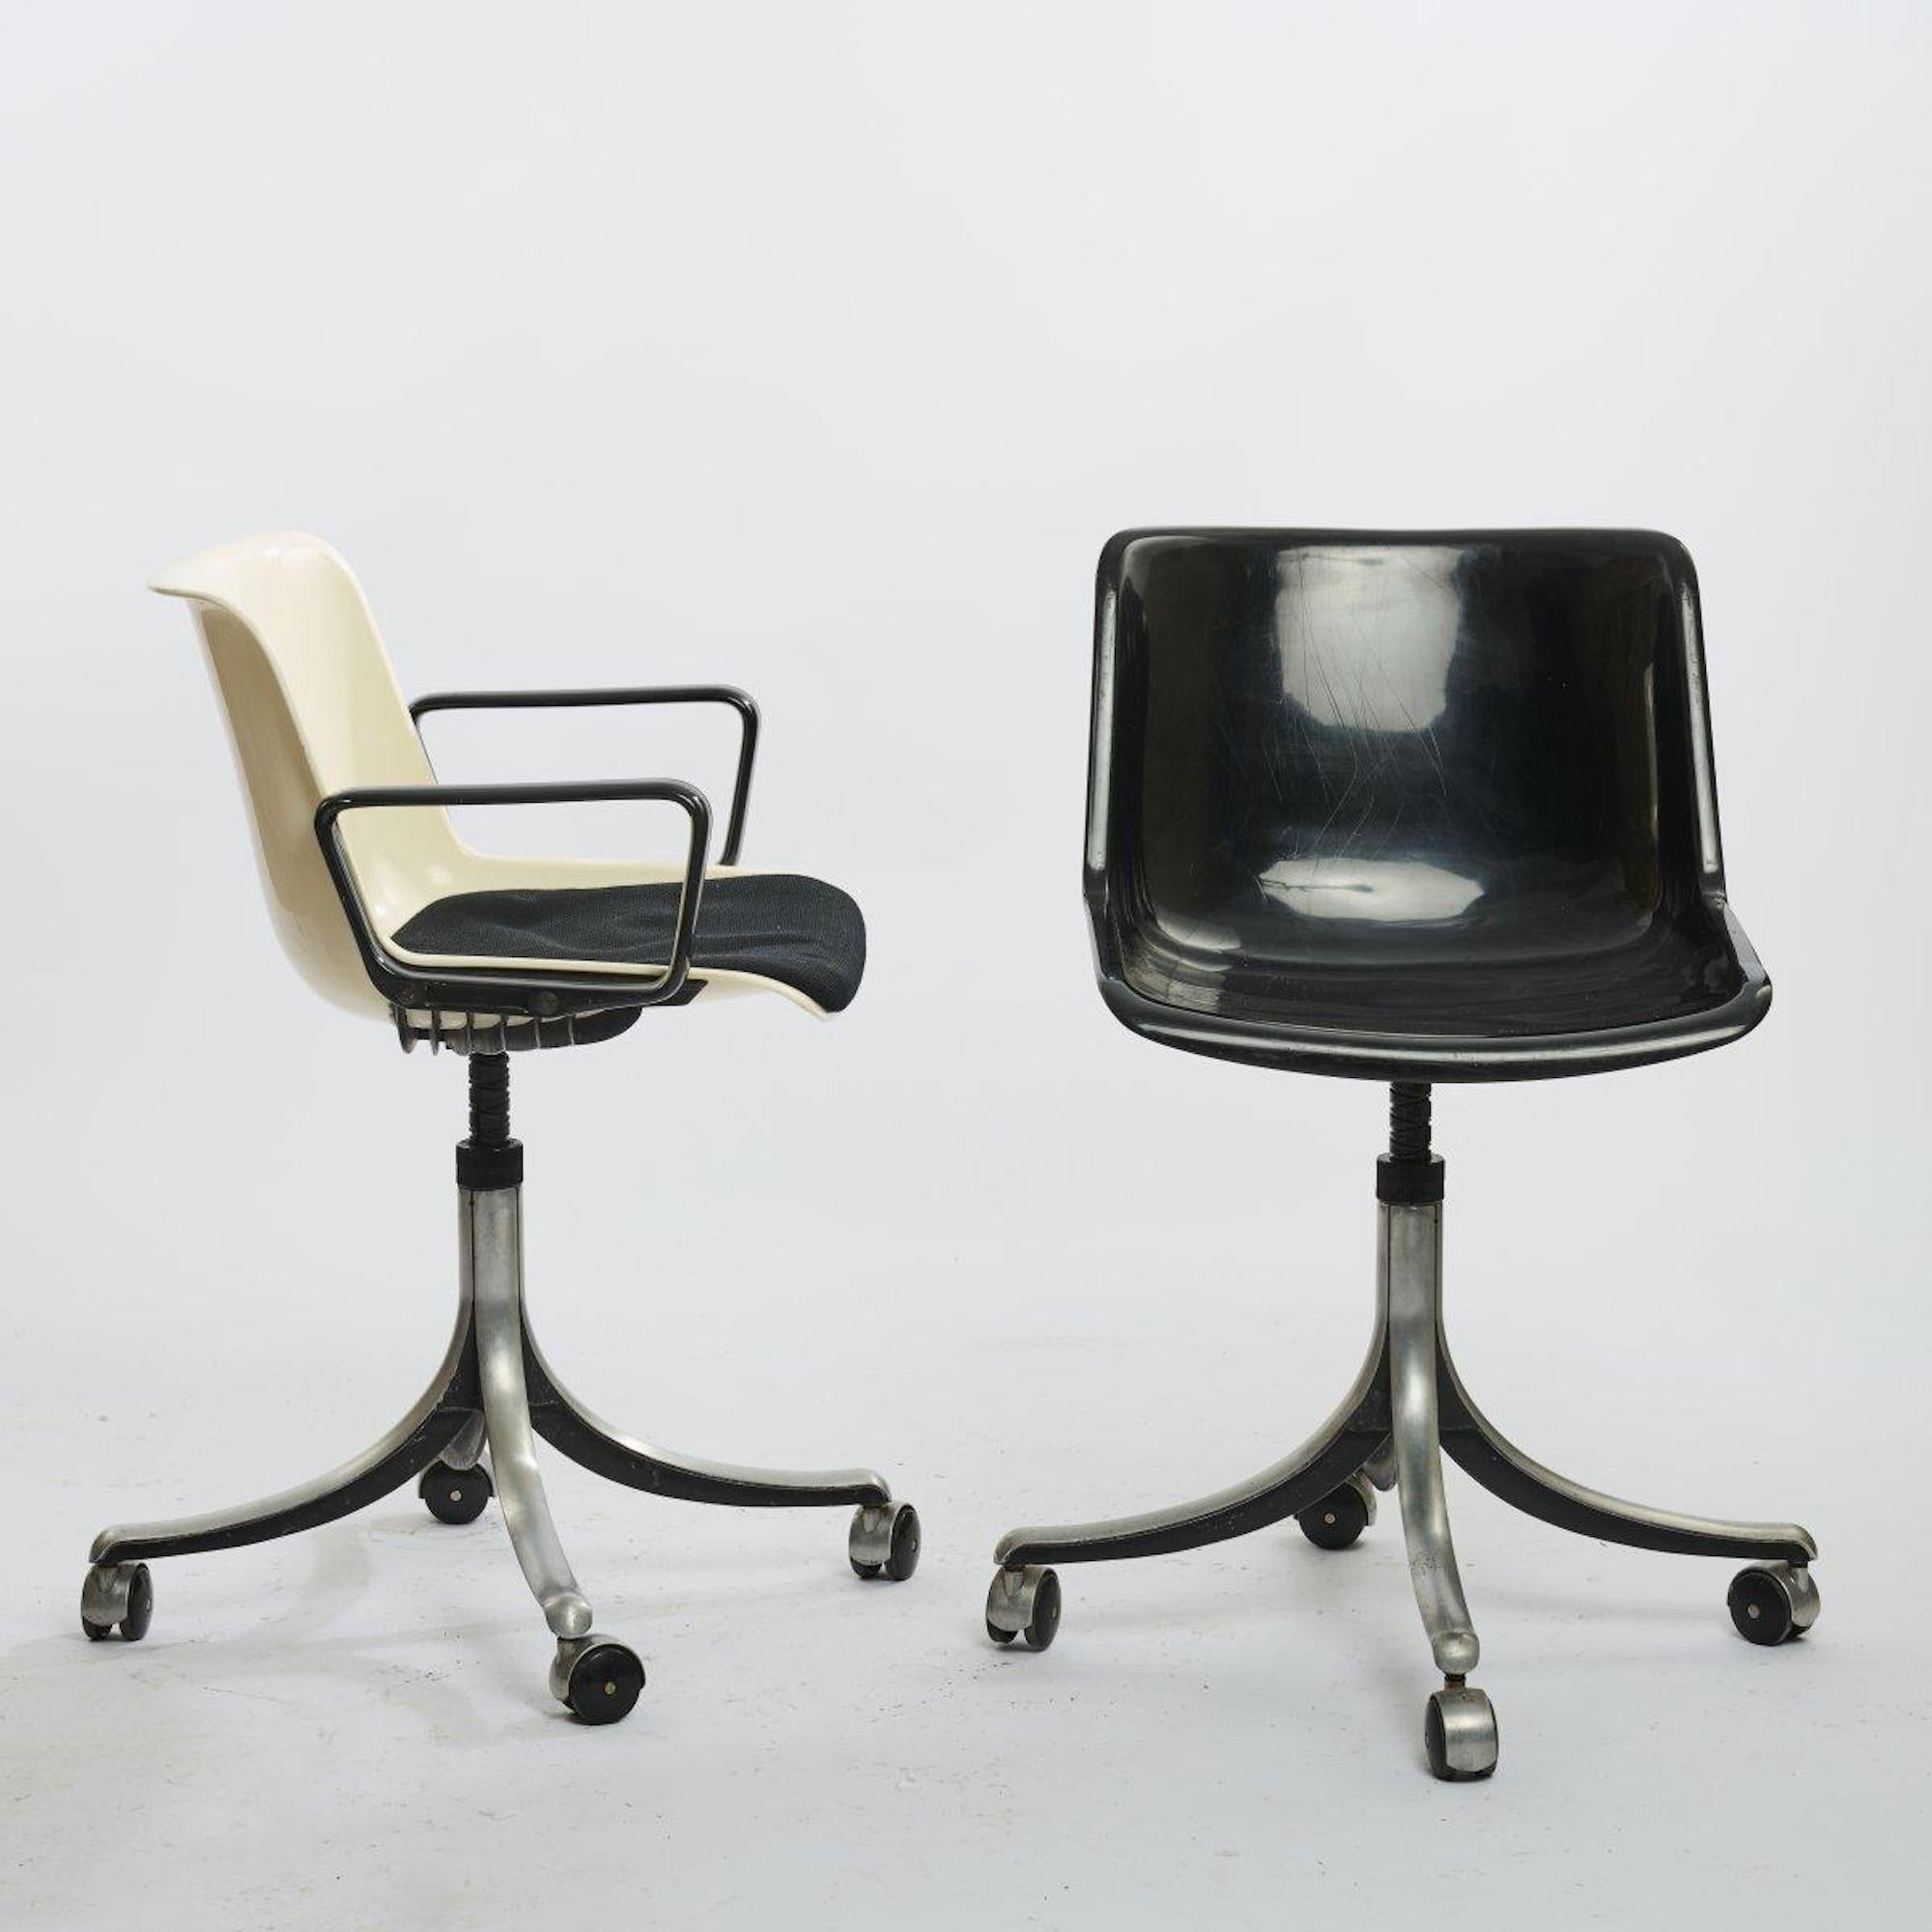 Four Modus Work Chairs by Centro Progetti Tecno, 1972. For Sale 5